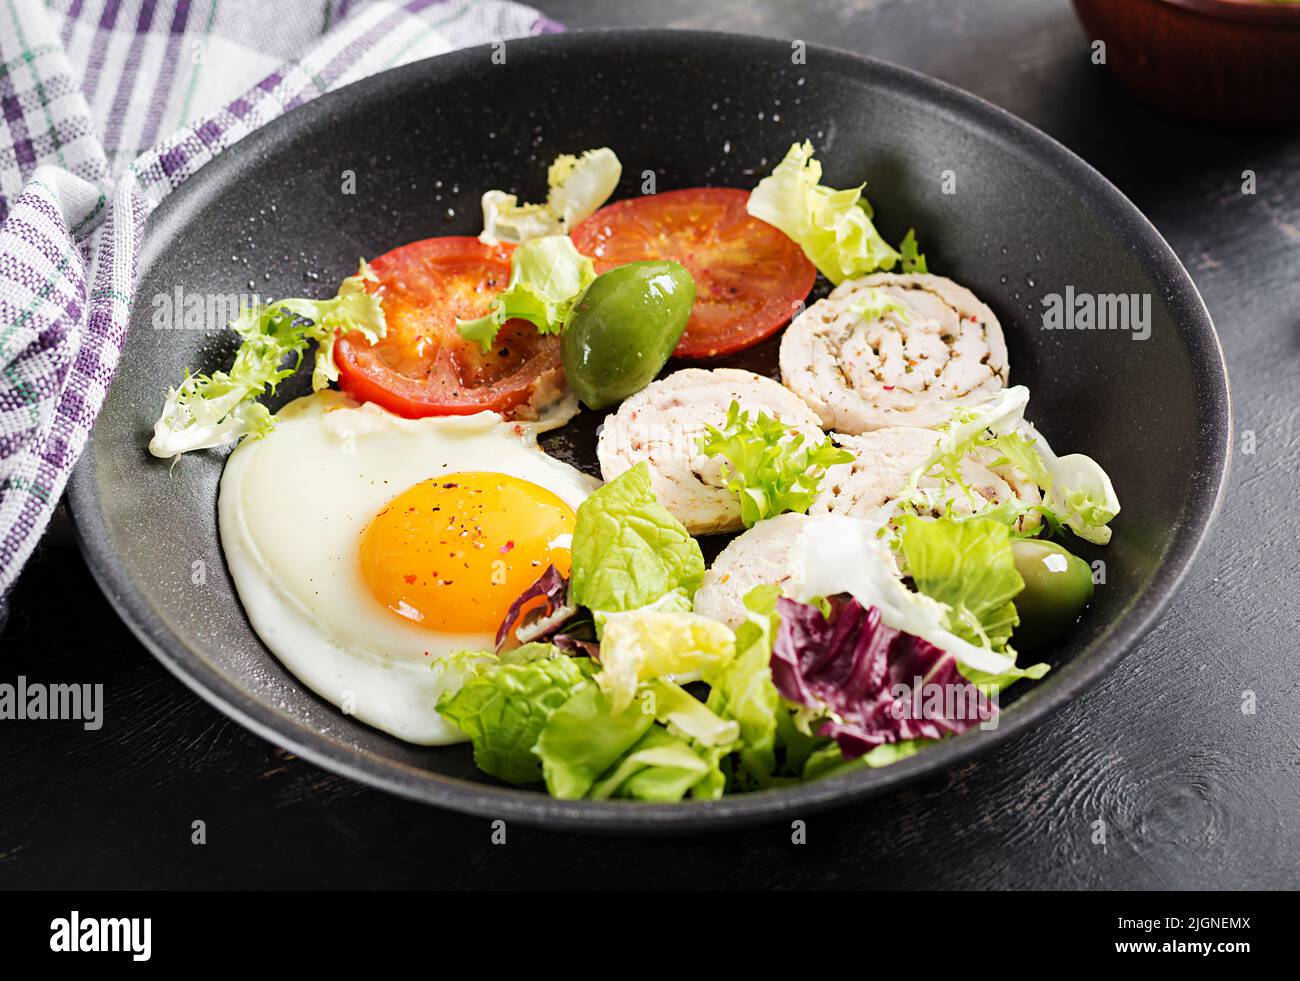 Fried egg, meat roll, olives and tomatoes. Keto, paleo breakfast. Ketogenic menu. Stock Photo